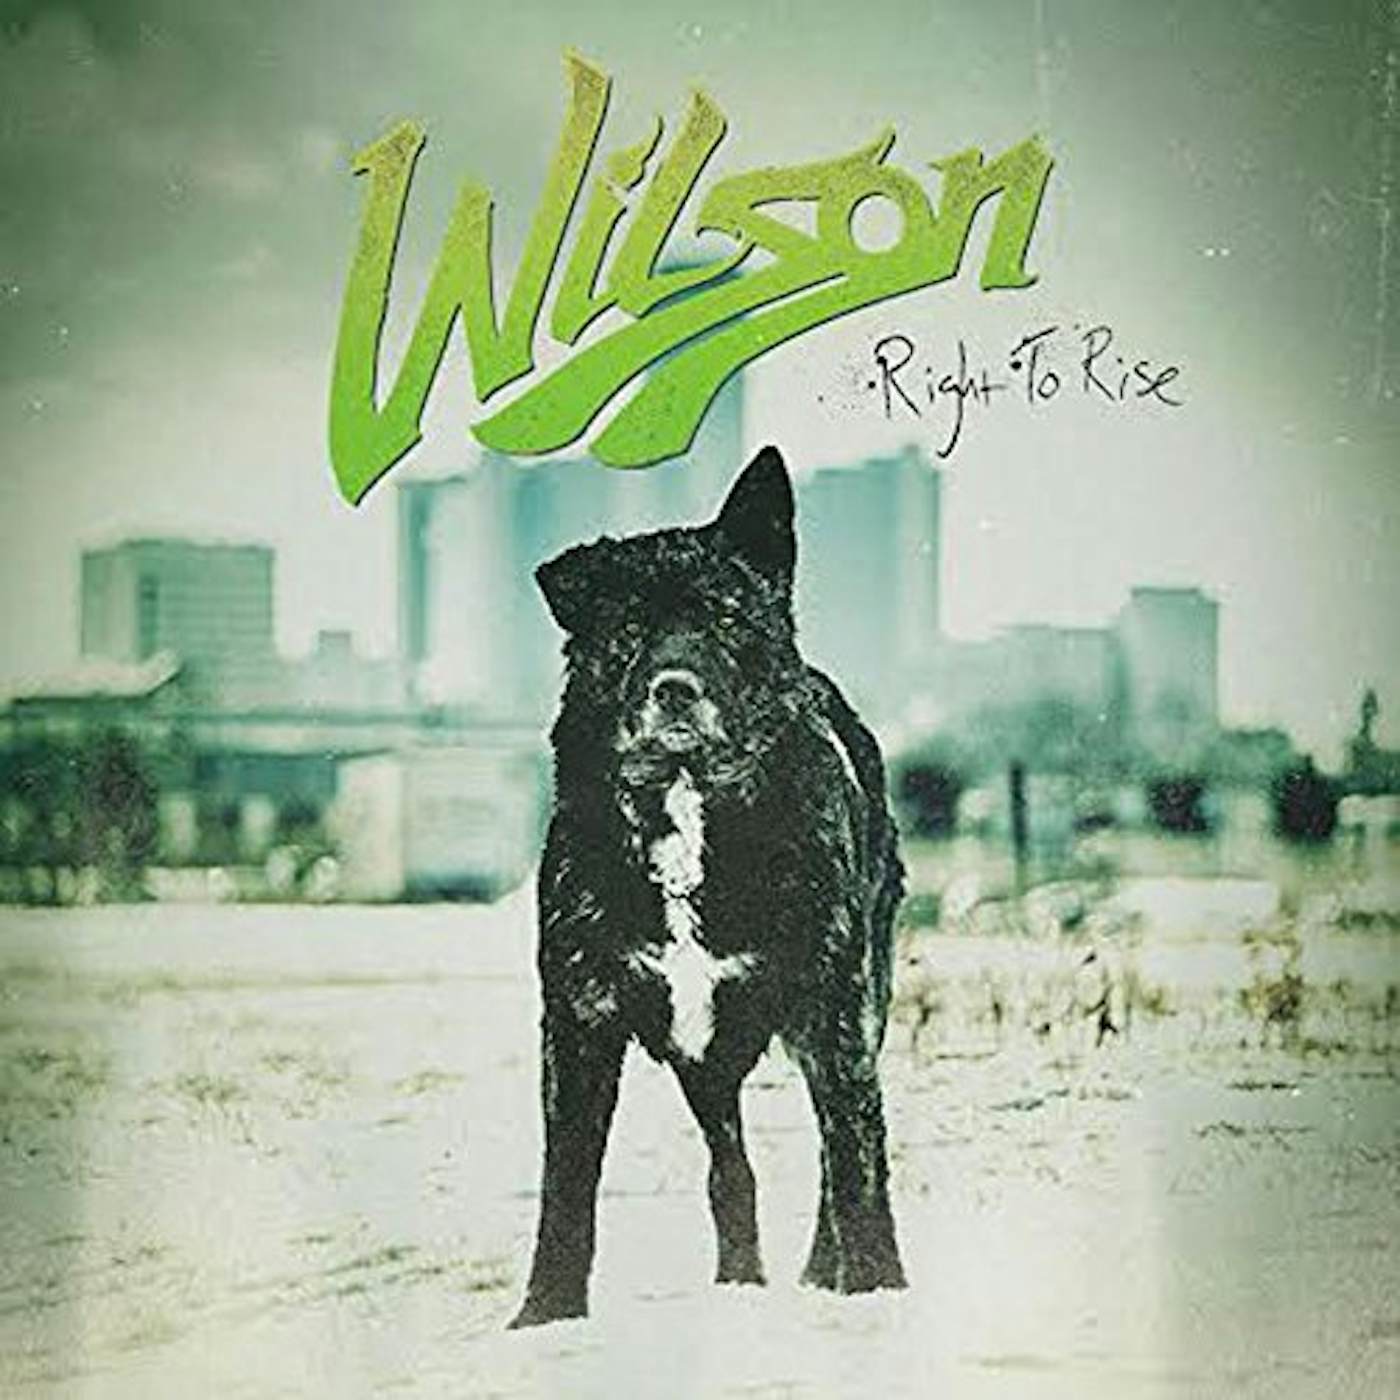 Wilson RIGHT TO RISE CD